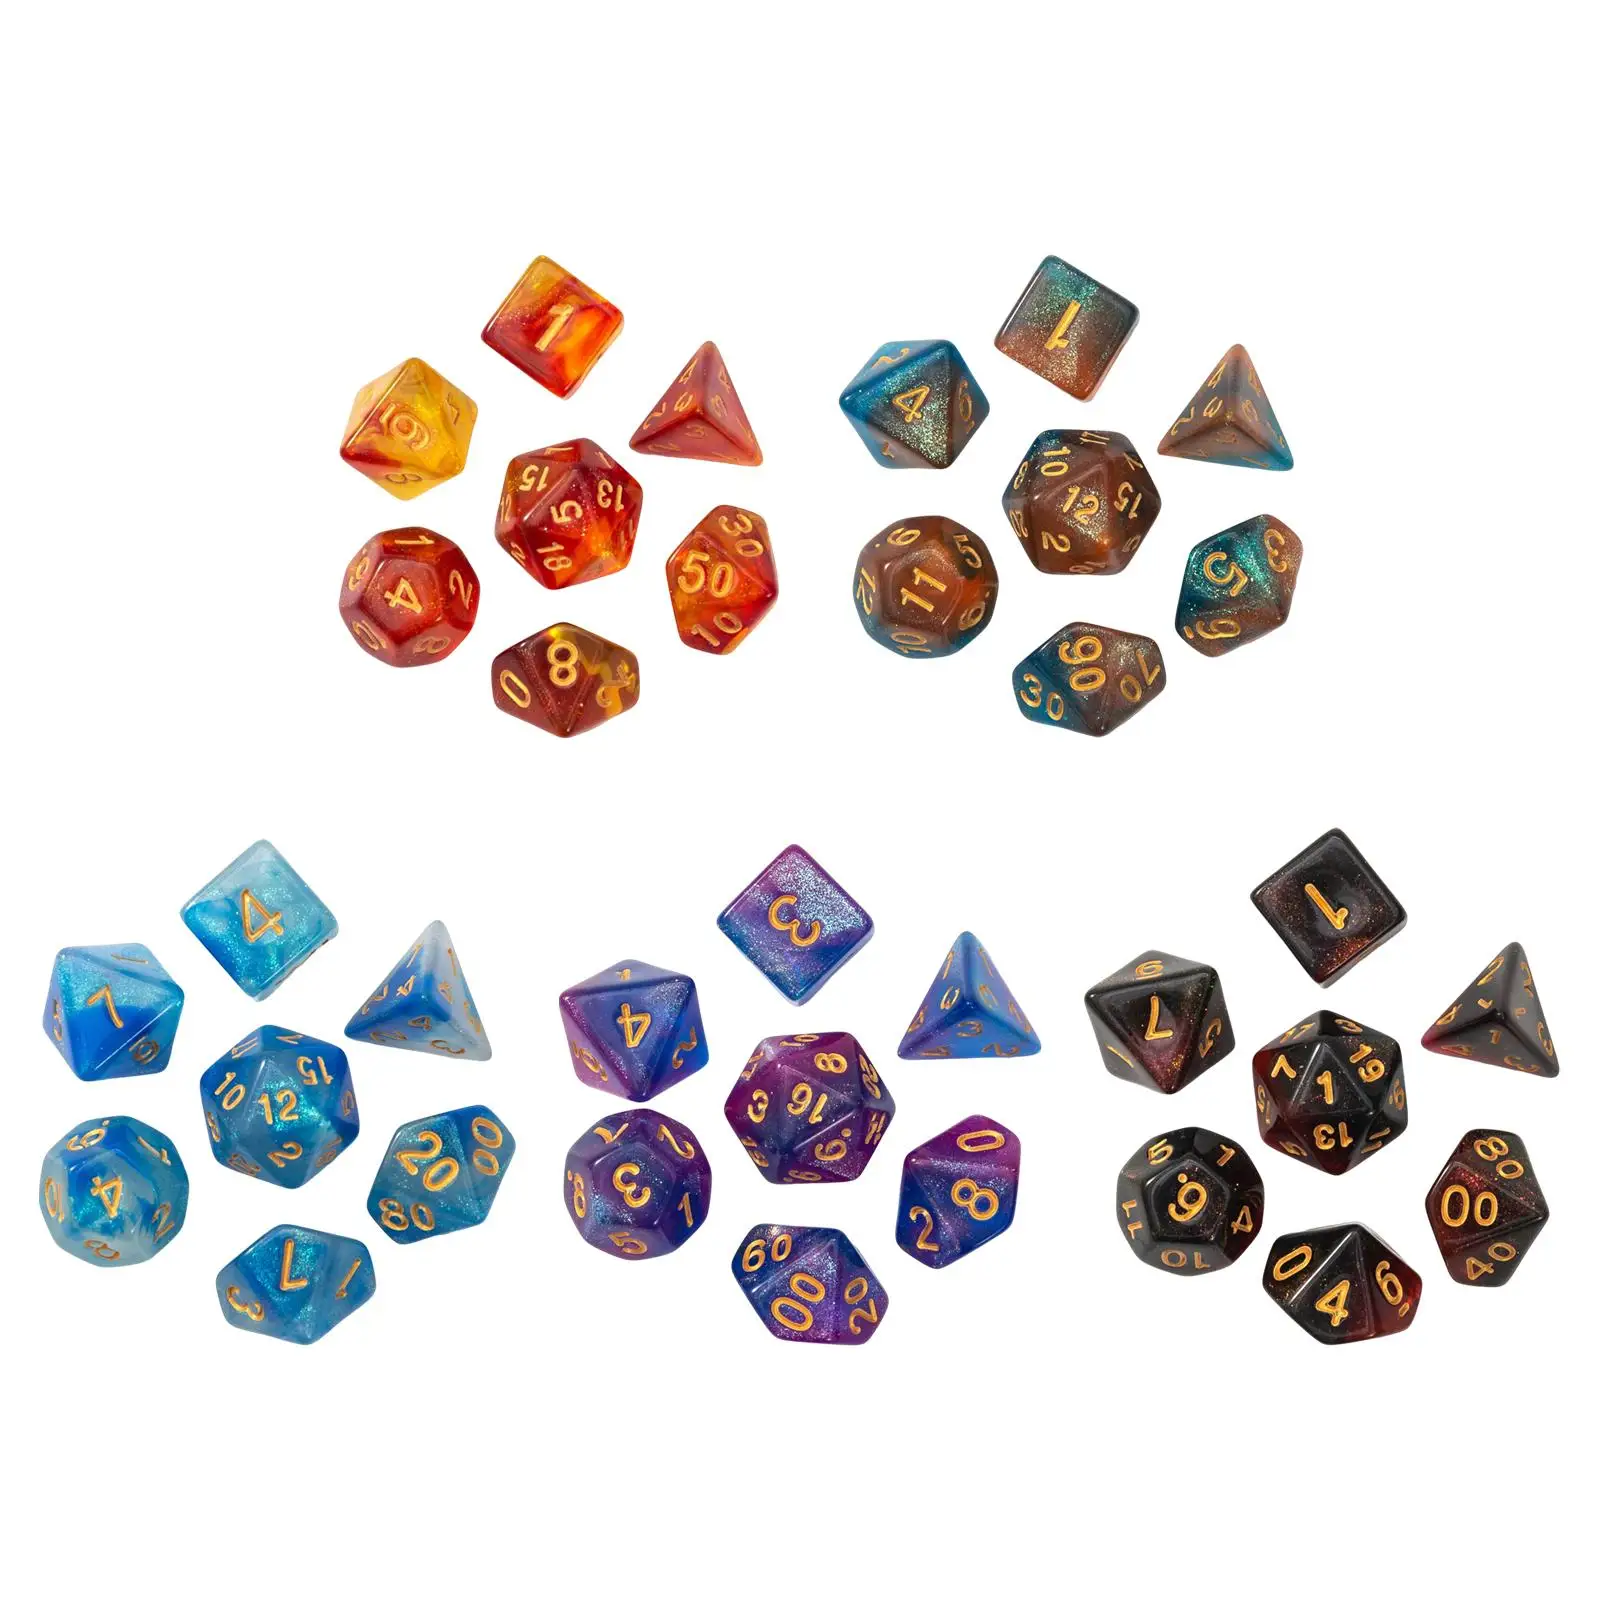 

7x D4 D8 D10 D12 D20 Bar Toys Polyhedral Dices Set Acrylic Dices for Role Playing RPG Card Games Classroom Accessories